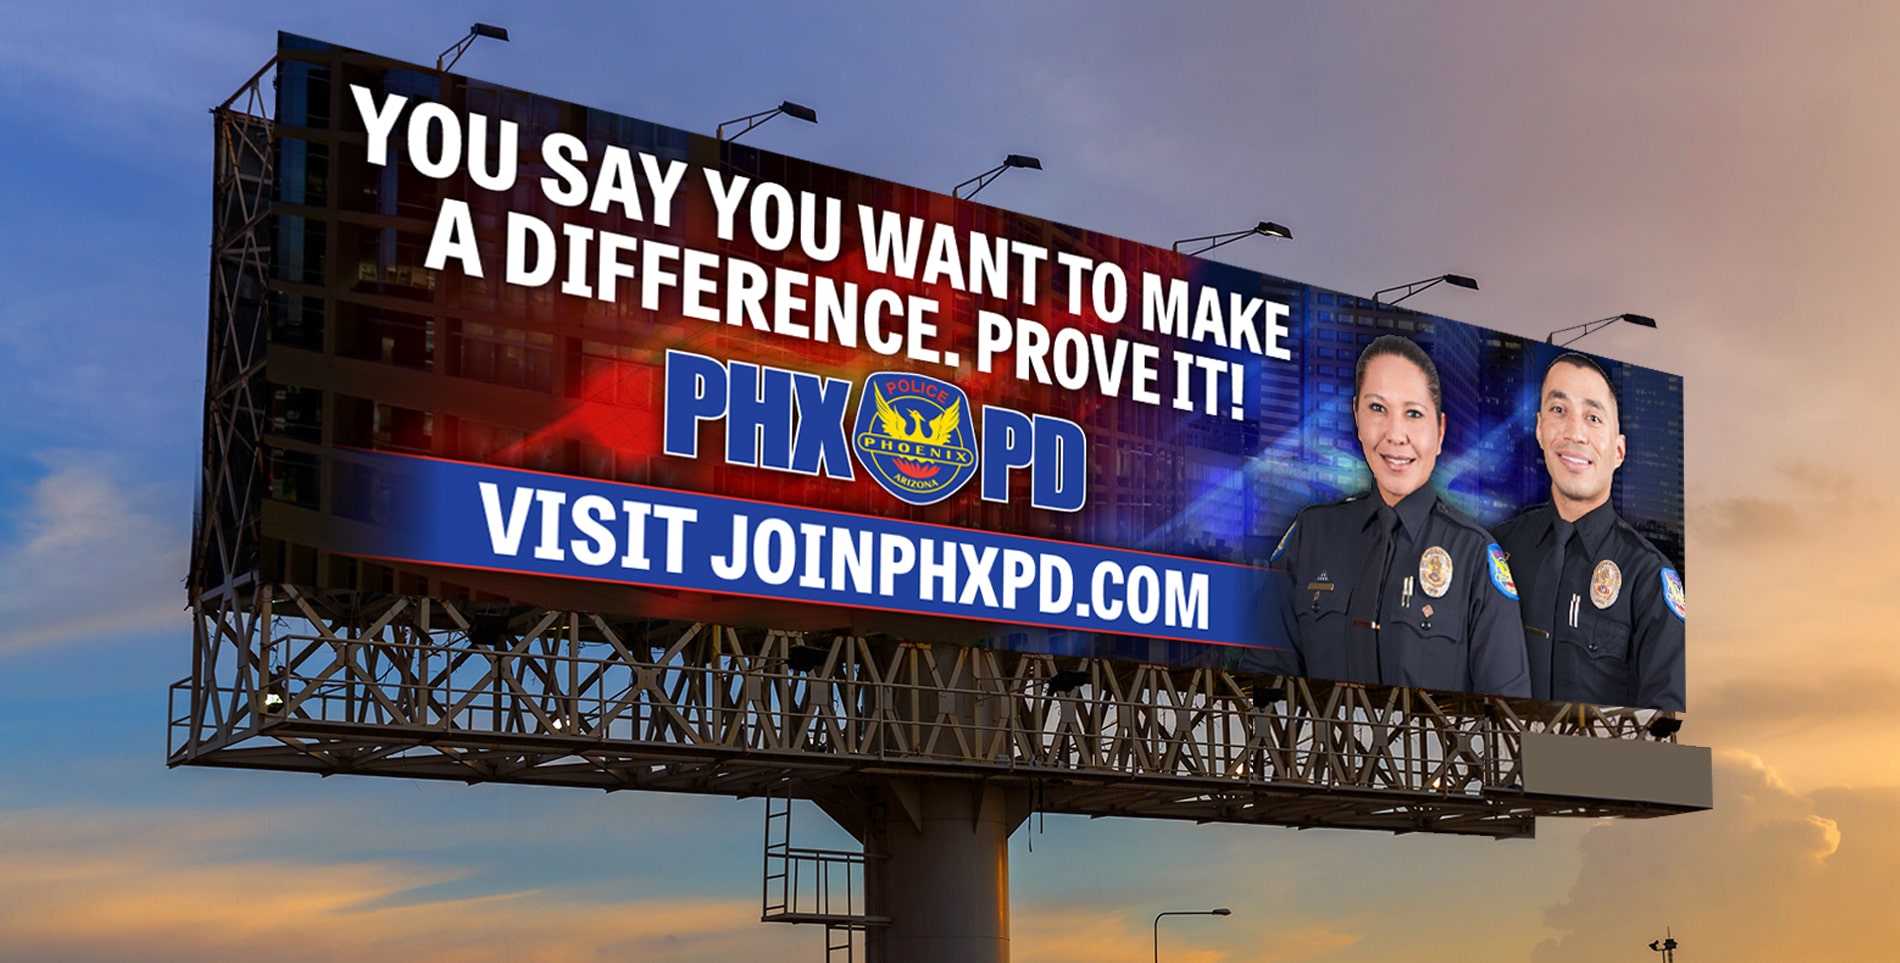 Billboard Ad for the Phoenix Police Department "You say you want to make a difference. Prove it!"